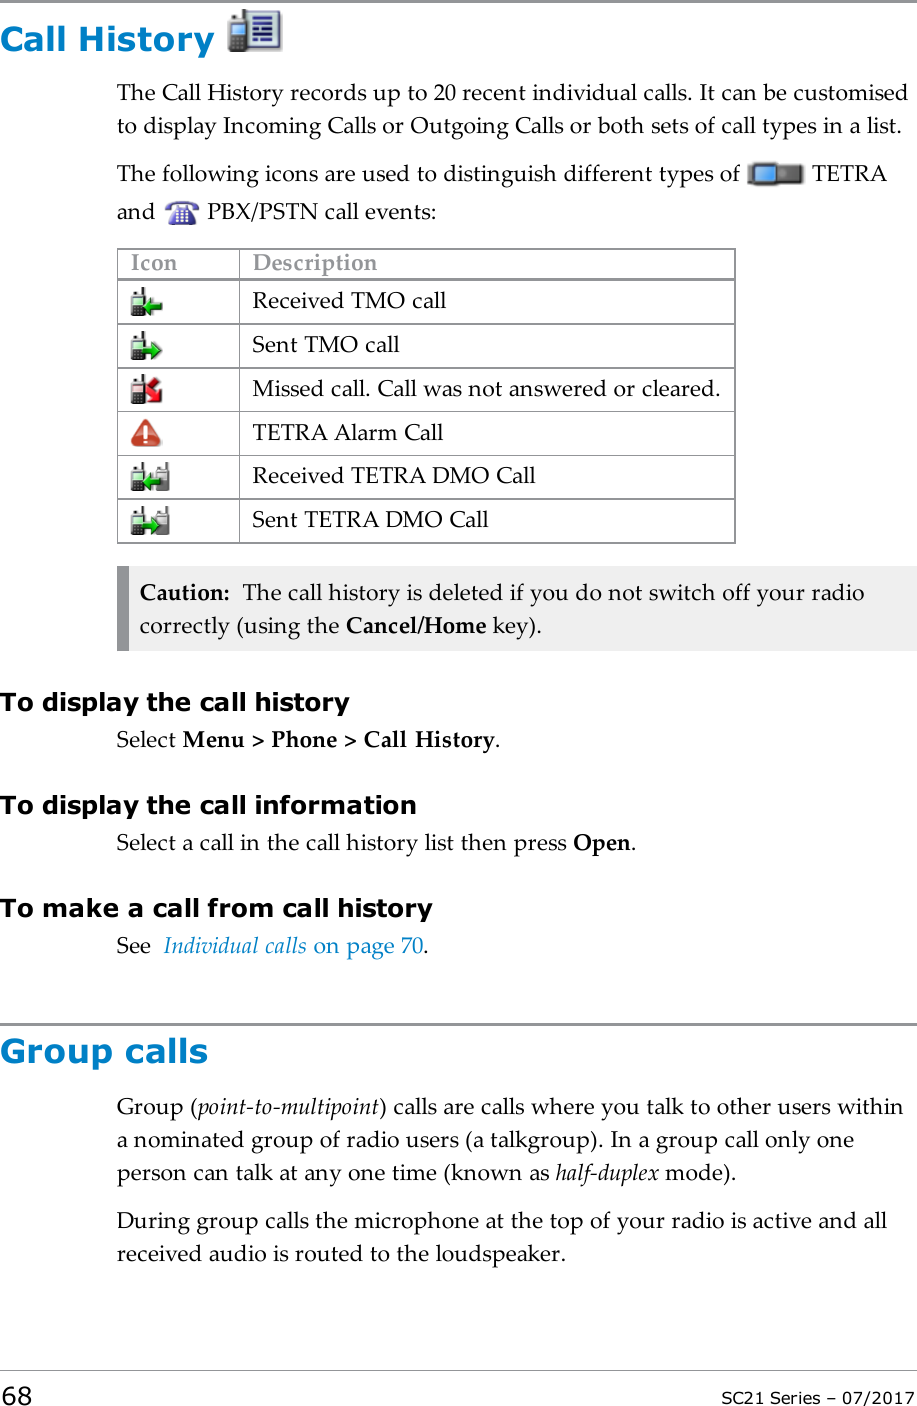 Call HistoryThe Call History records up to 20 recent individual calls. It can be customisedto display Incoming Calls or Outgoing Calls or both sets of call types in a list.The following icons are used to distinguish different types of TETRAand PBX/PSTN call events:Icon DescriptionReceived TMO callSent TMO callMissed call. Call was not answered or cleared.TETRA Alarm CallReceived TETRA DMO CallSent TETRA DMO CallCaution: The call history is deleted if you do not switch off your radiocorrectly (using the Cancel/Home key).To display the call historySelect Menu &gt; Phone &gt; Call History.To display the call informationSelect a call in the call history list then press Open.To make a call from call historySee Individual calls on page70.Group callsGroup (point-to-multipoint) calls are calls where you talk to other users withina nominated group of radio users (a talkgroup). In a group call only oneperson can talk at any one time (known as half-duplex mode).During group calls the microphone at the top of your radio is active and allreceived audio is routed to the loudspeaker.68 SC21 Series – 07/2017